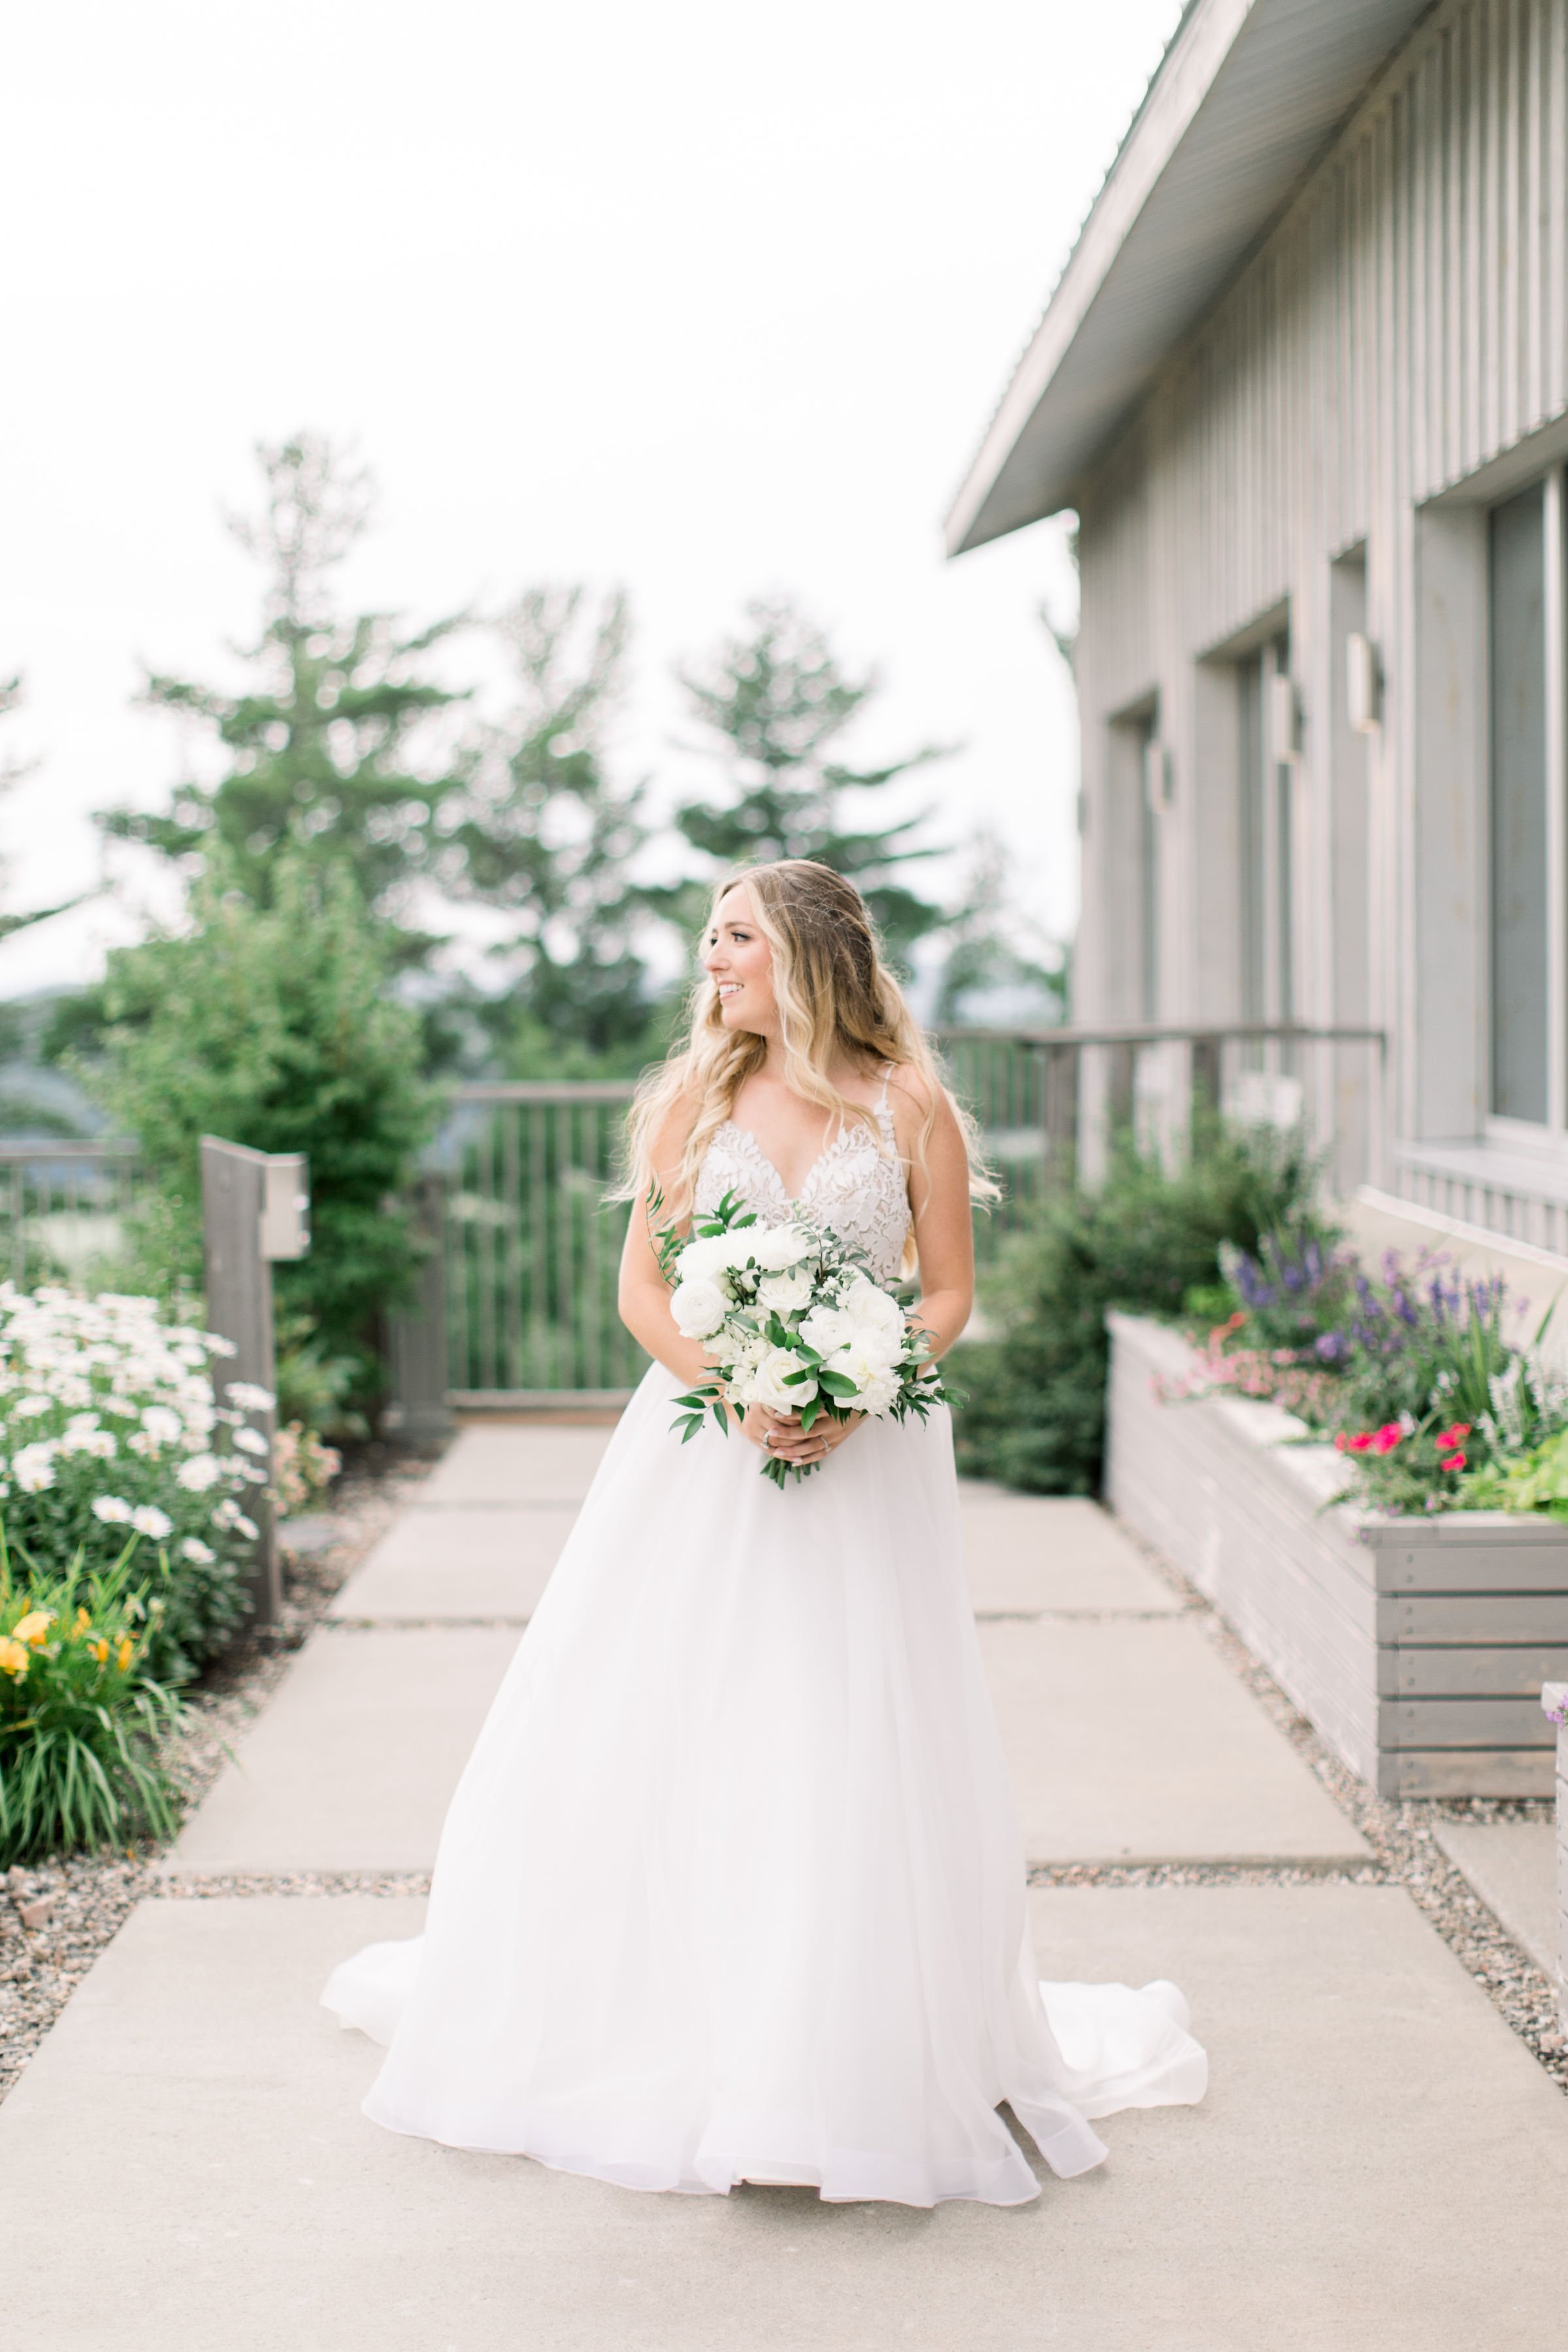  A bride in a strappy wedding dress with a white floral bouquet by Chelsea Mason Photography in Quebec. bridal portrait summer bridals #Quebecweddings #elegantoutdoorwedding #Quebecweddingphotographers #Chelseamasonphotography #Chelseamasonweddings 